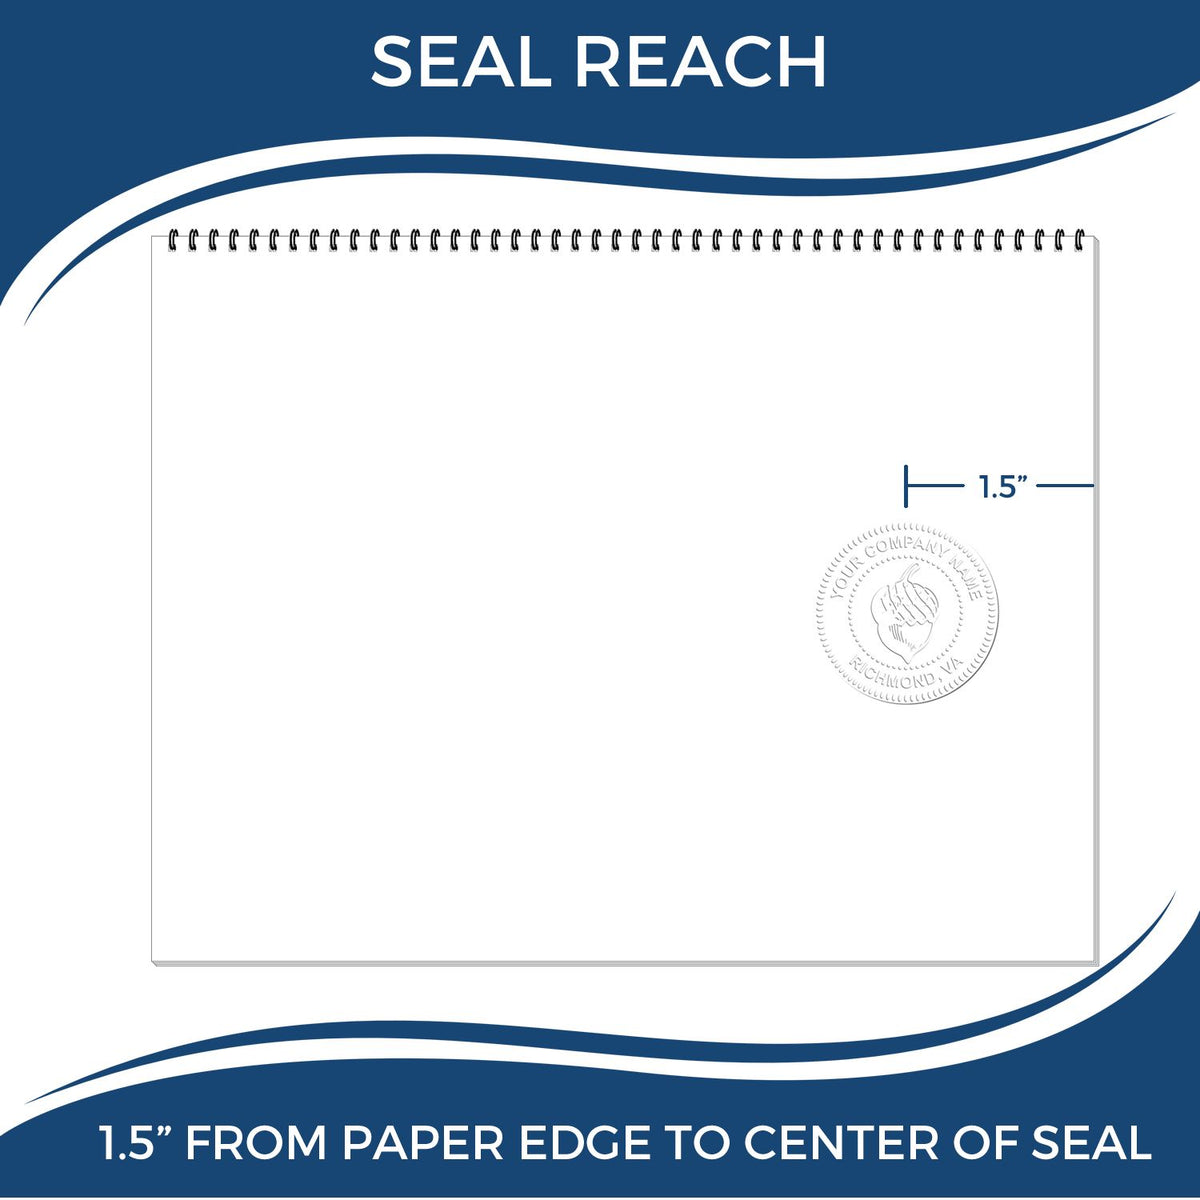 An infographic showing the seal reach which is represented by a ruler and a miniature seal image of the Soft Utah Professional Geologist Seal